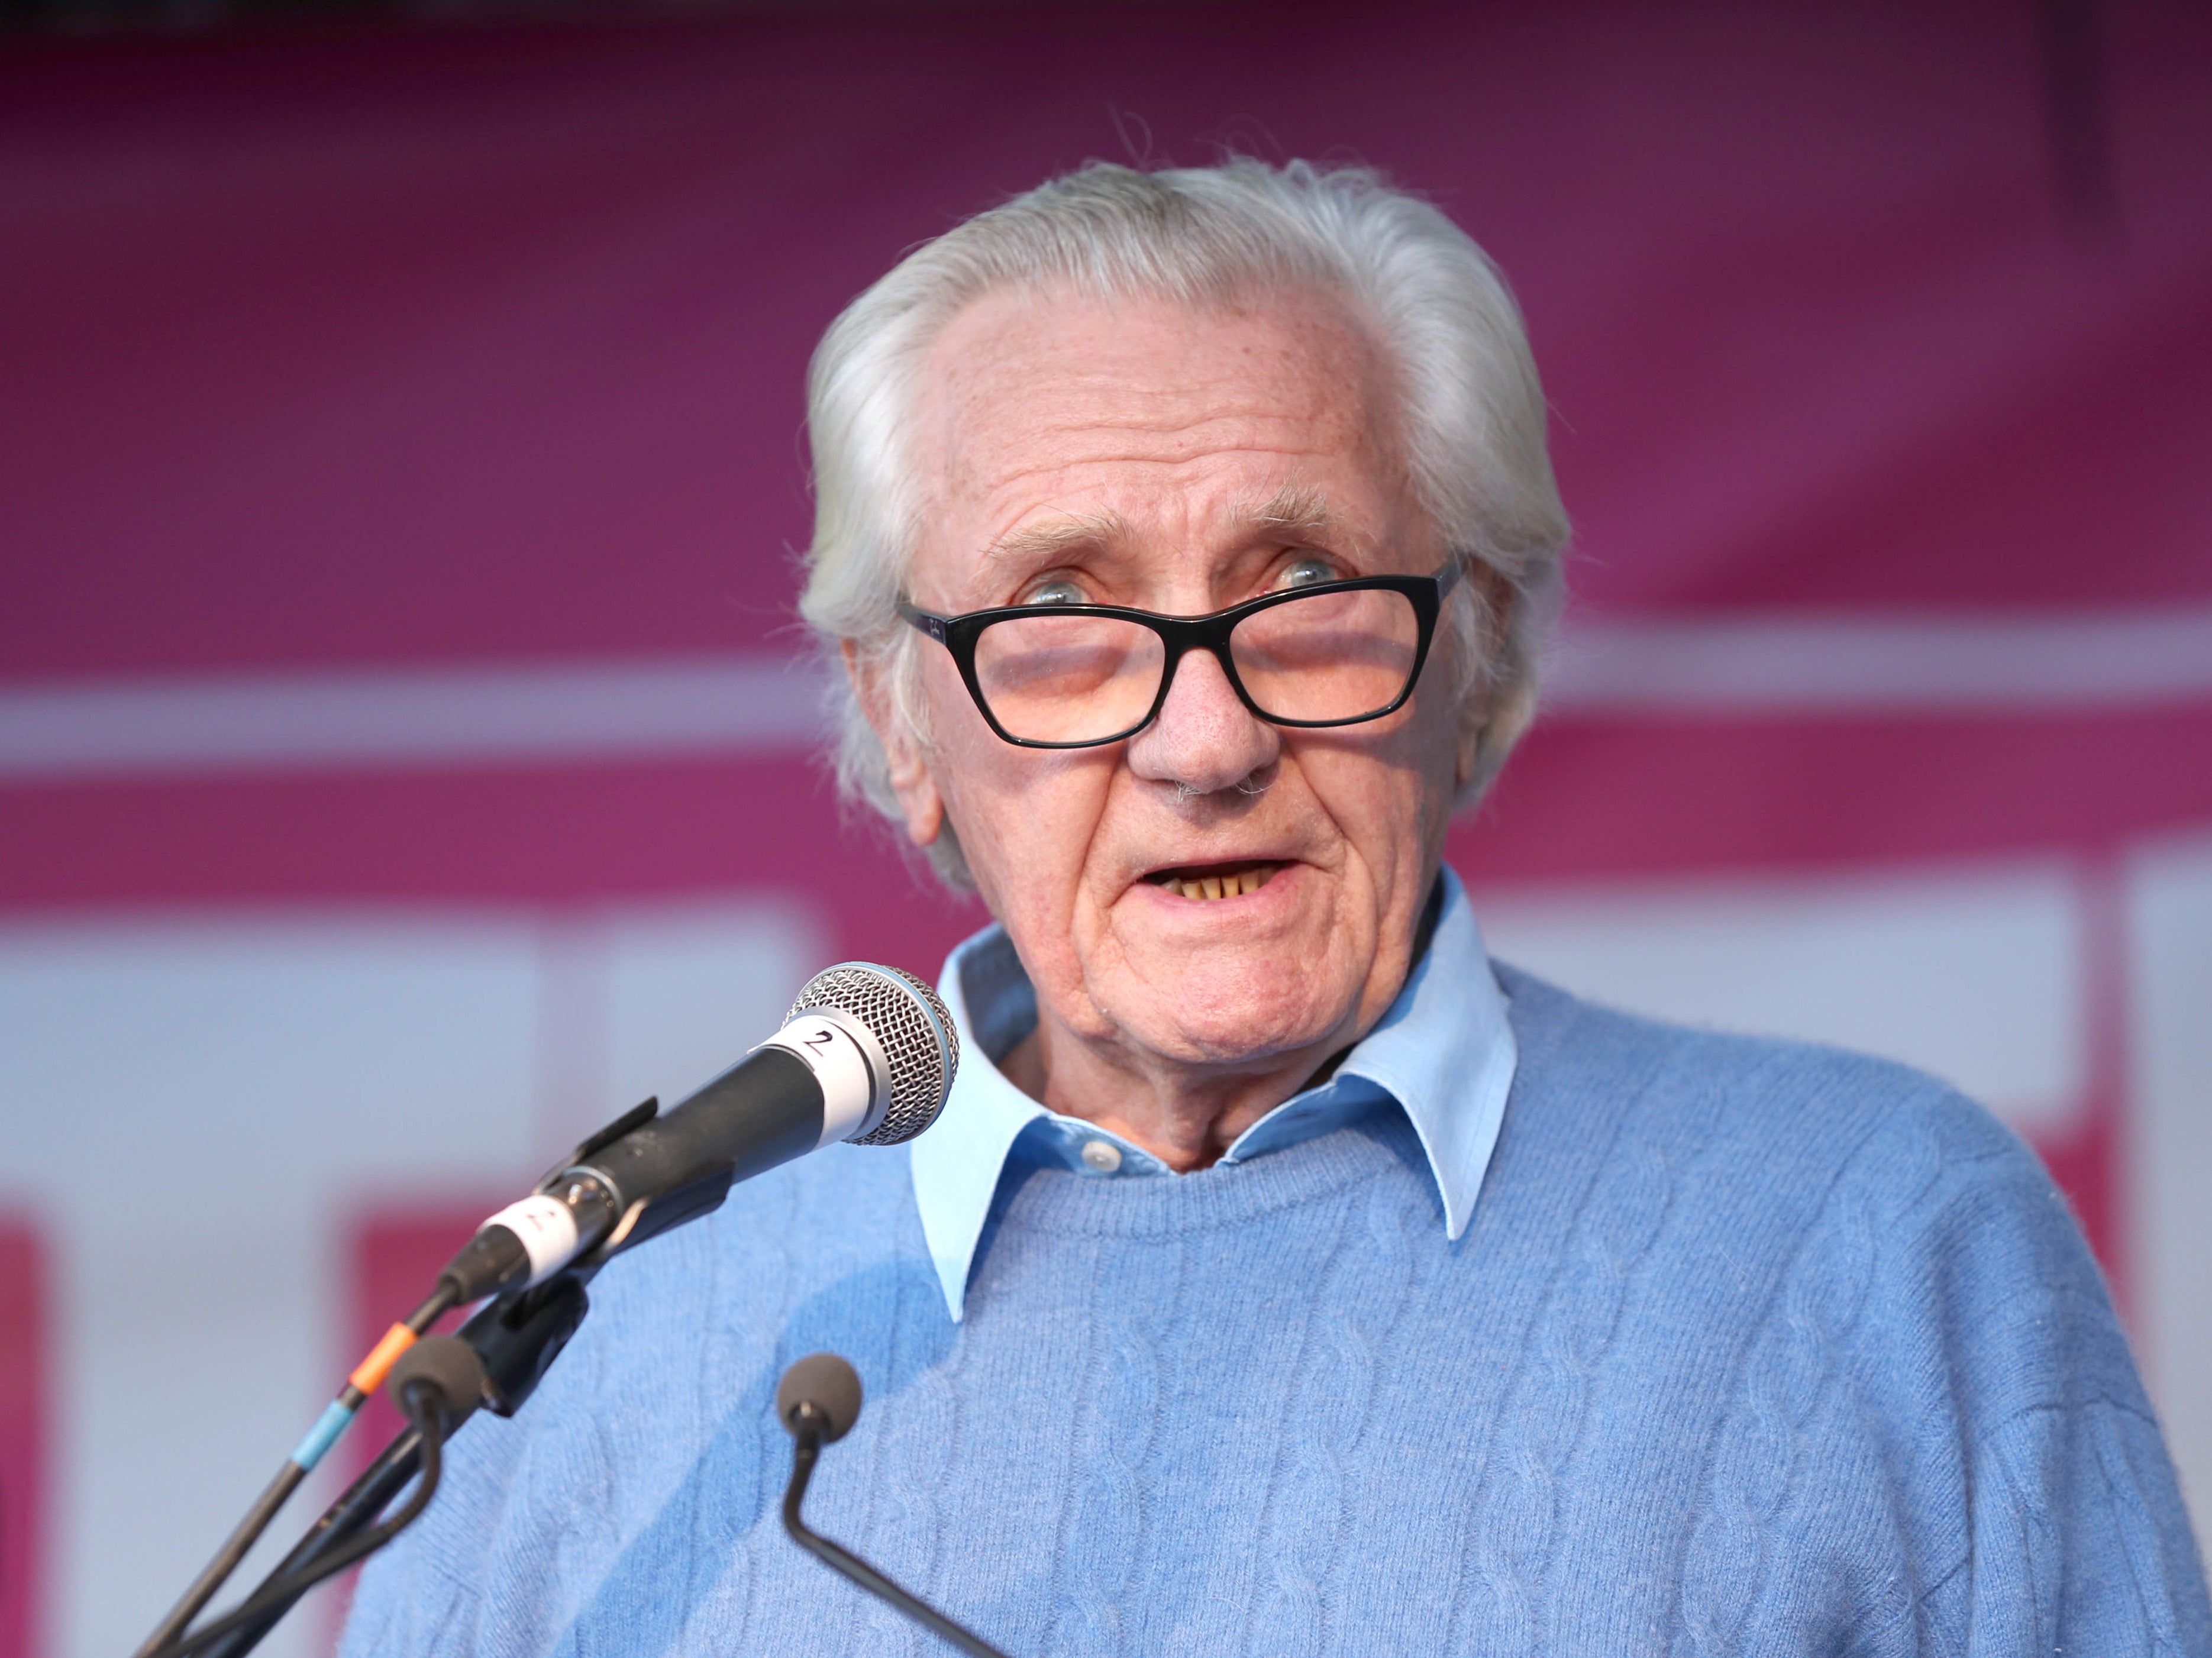 Lord Heseltine speaking at an anti-Brexit rally